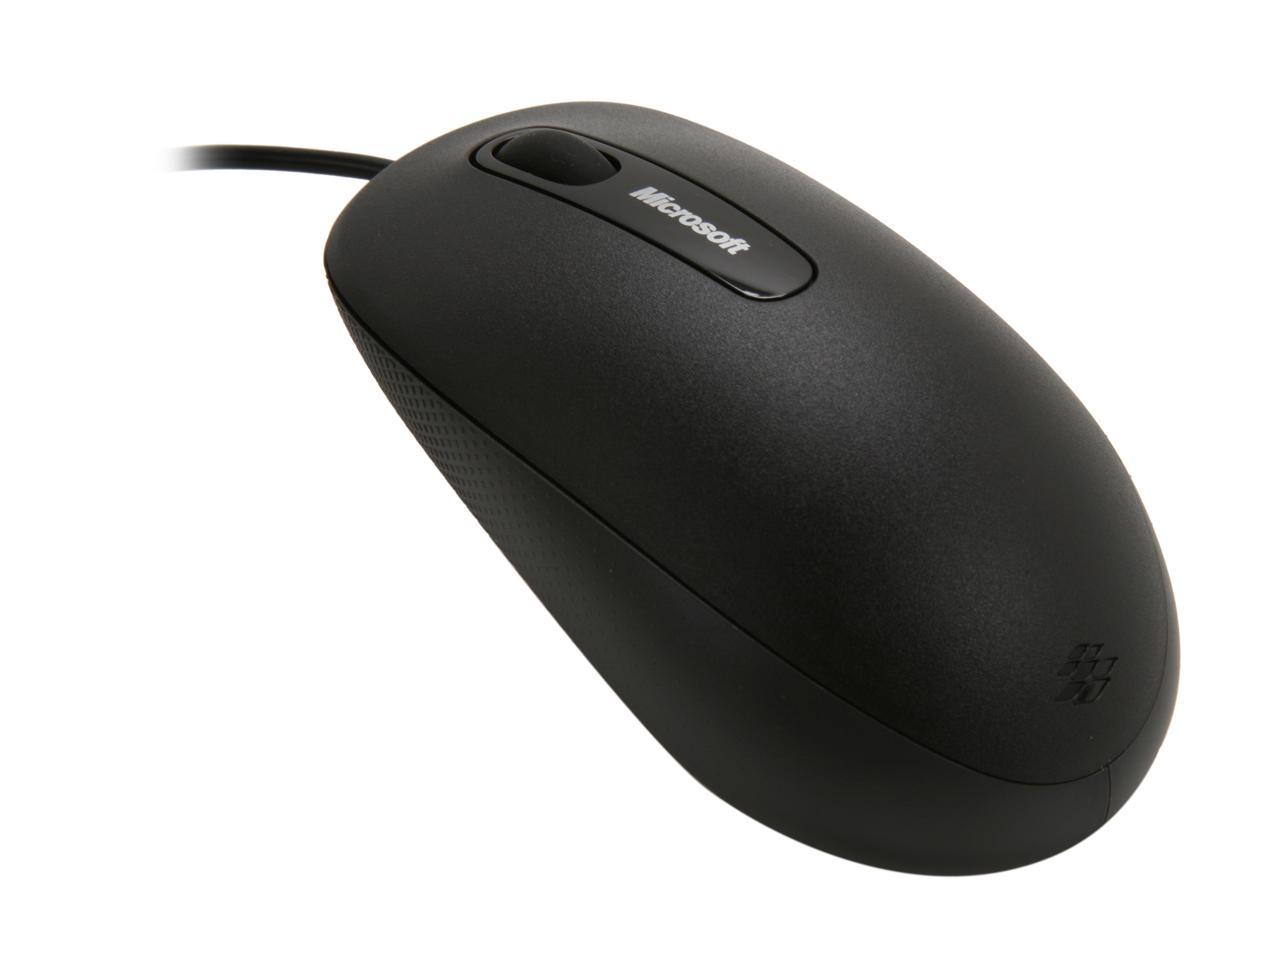 honey shame Recollection Microsoft Comfort Mouse 3000 for Business Black 3 Buttons 1 x Wheel USB  Wired BlueTrack 1000 dpi - Newegg.com